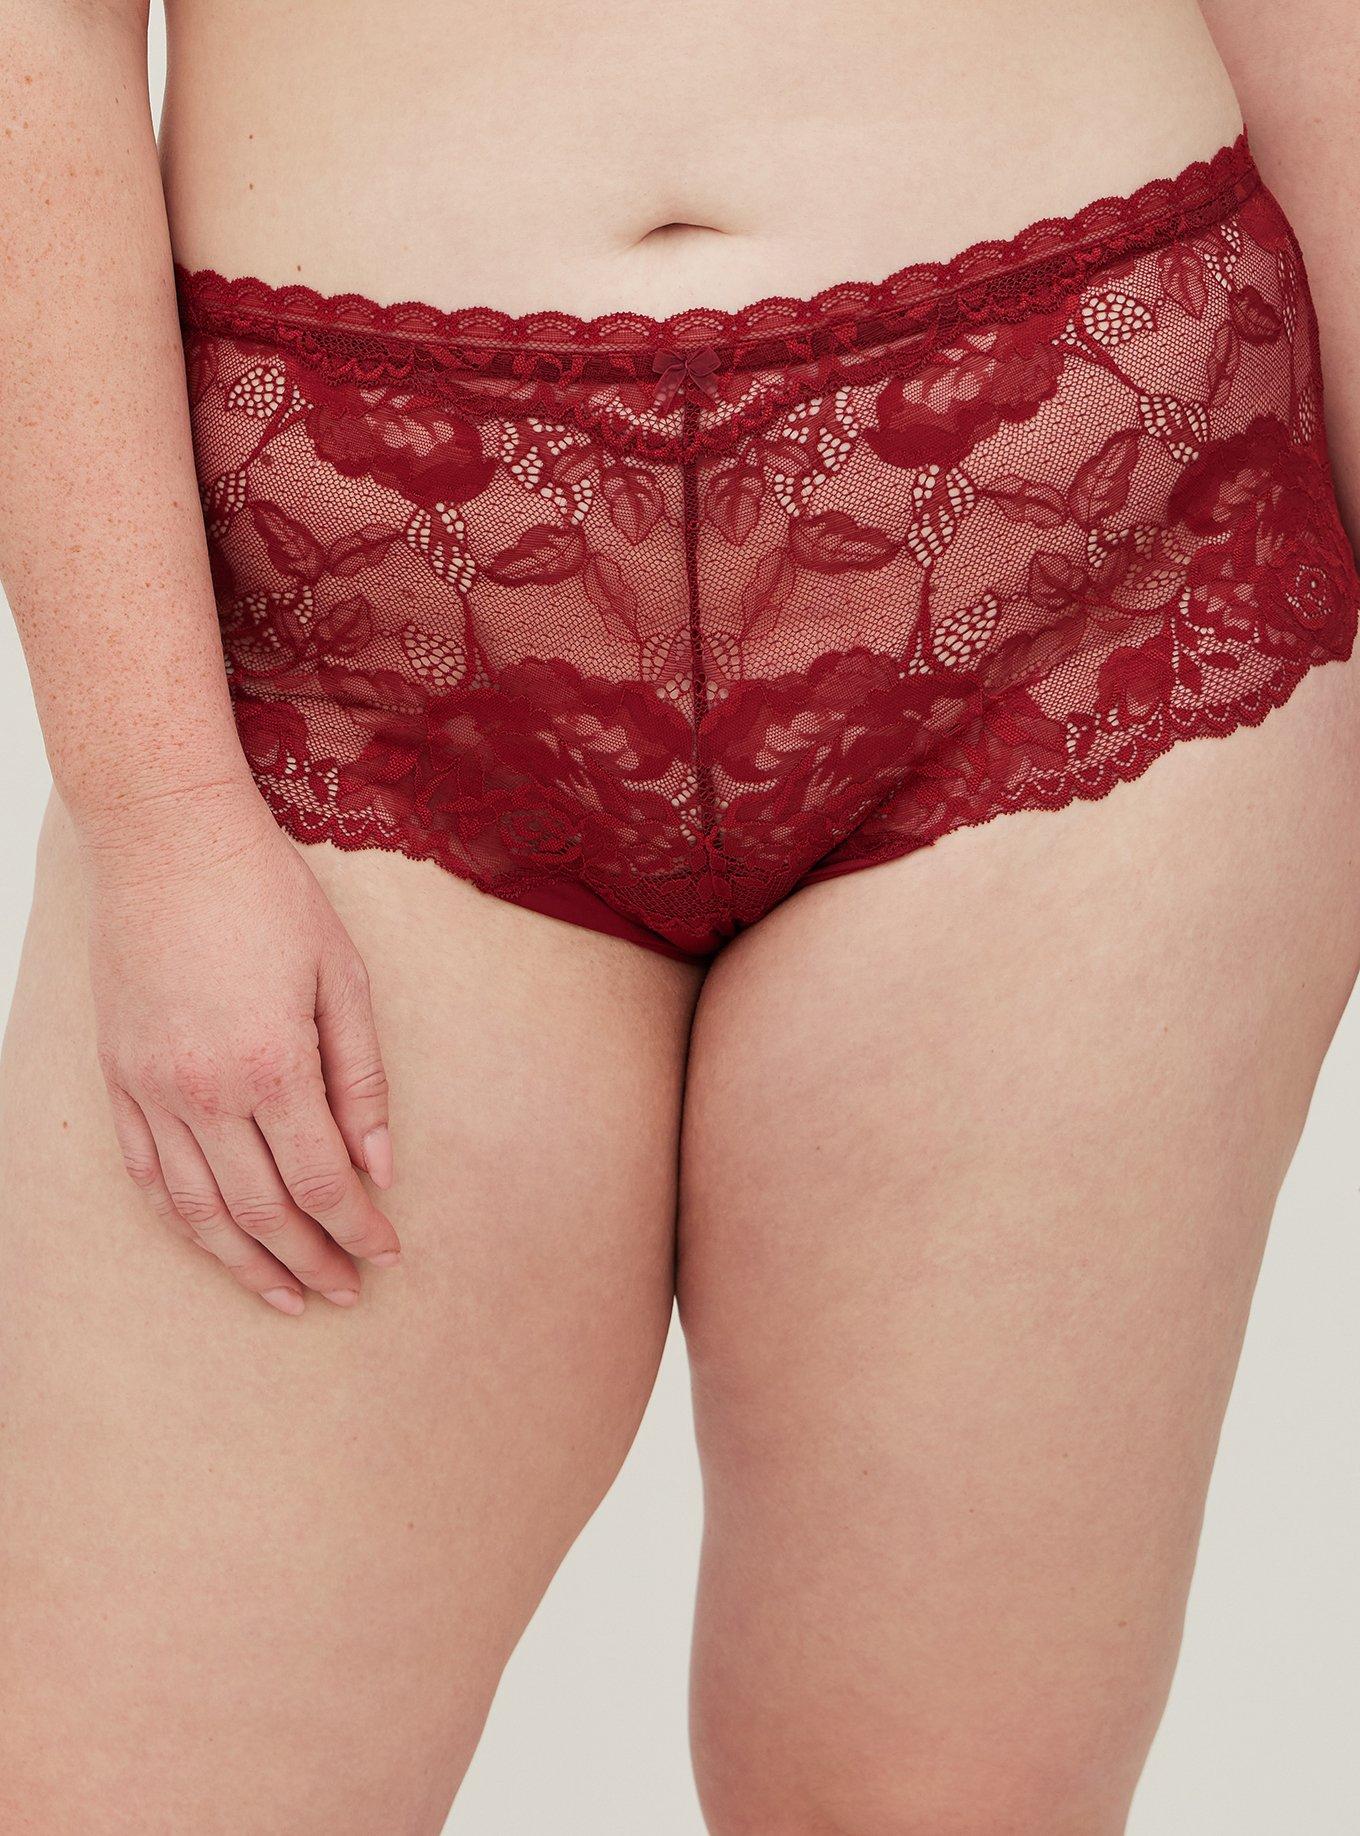 Torrid Red Lace With Sexy Open Back Slit Cheeky Panty Plus Size 4X